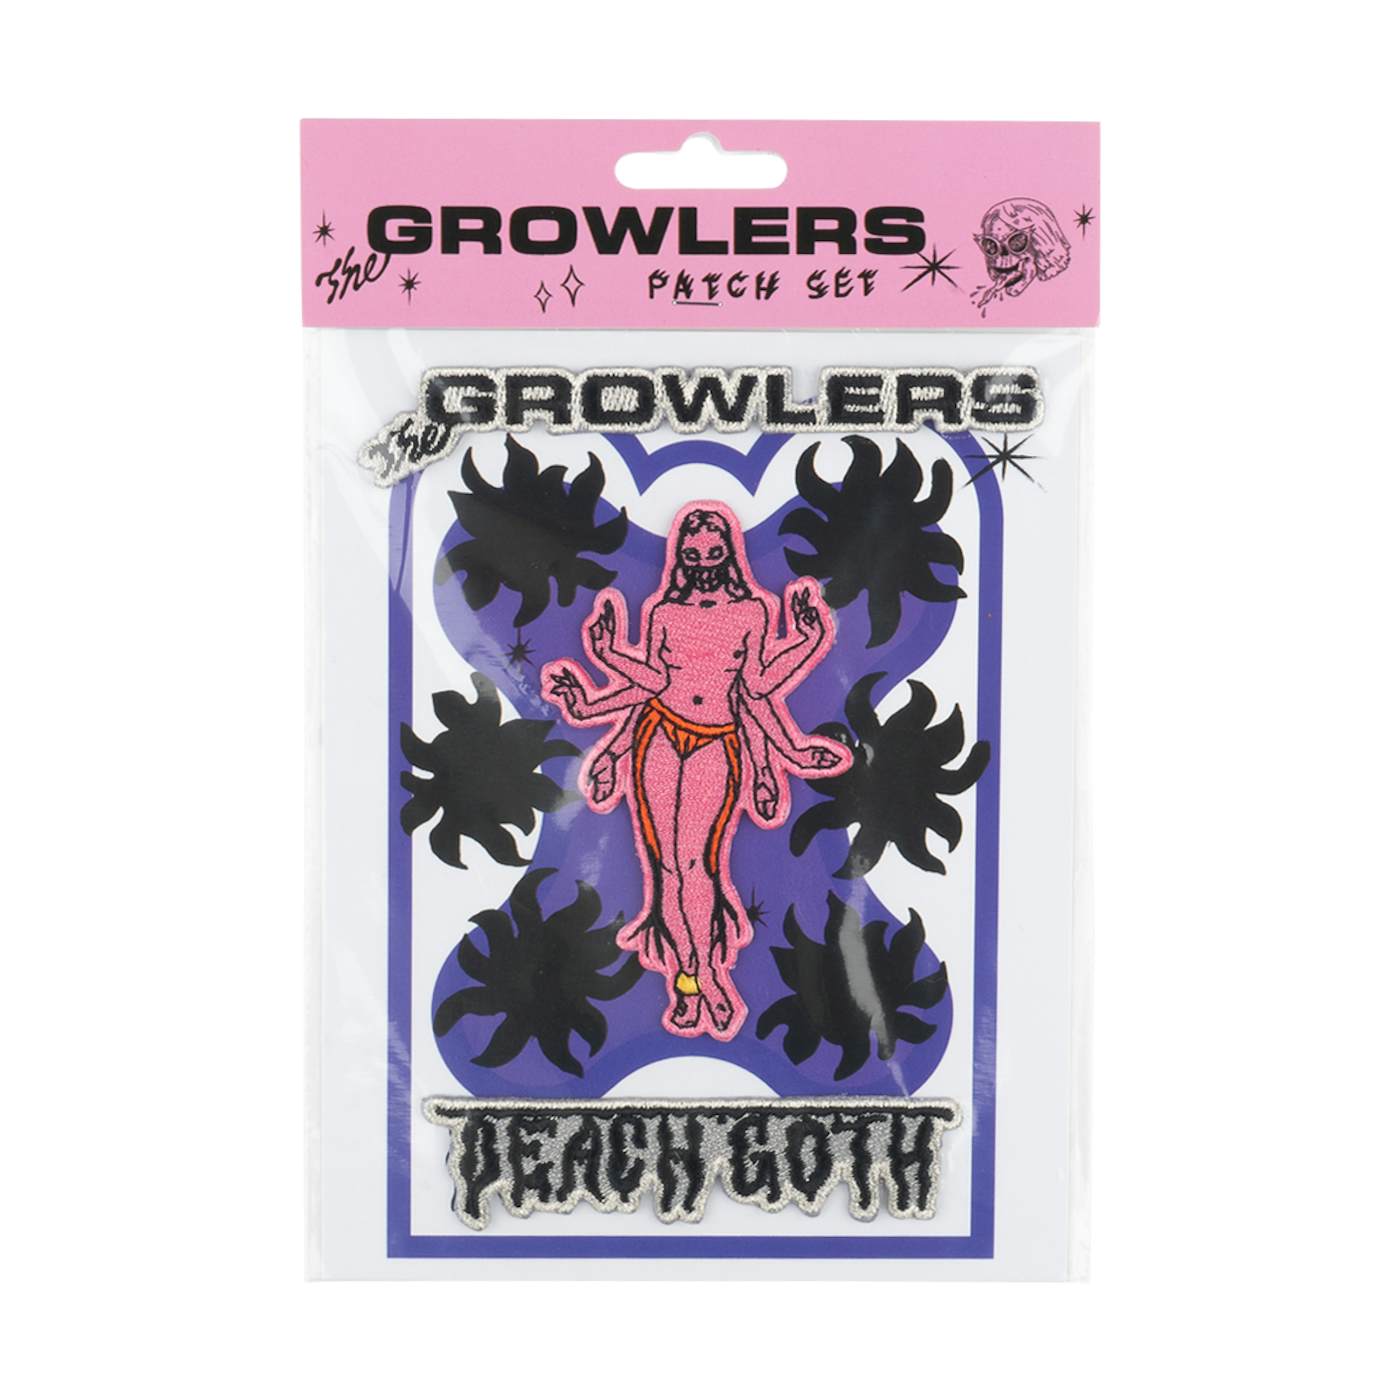 The Growlers Collectible Patch Set